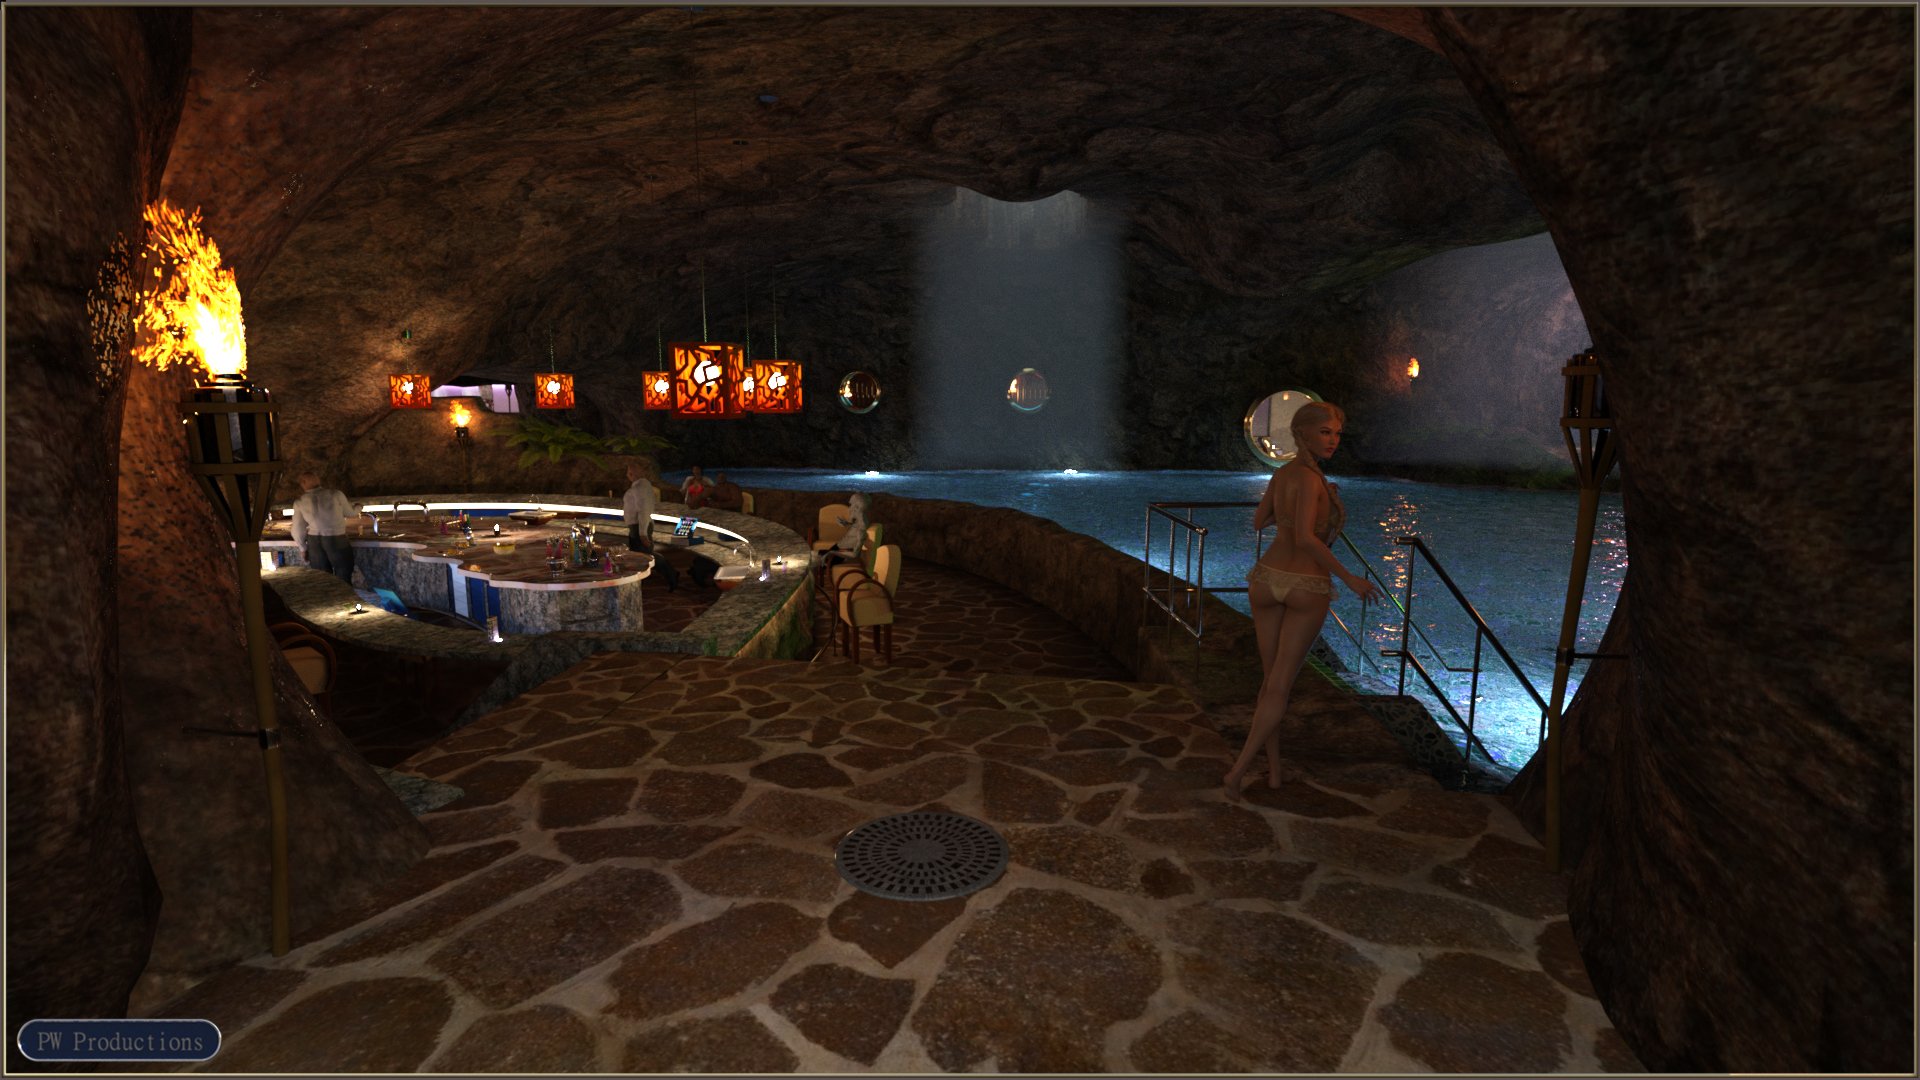 PW El Grotto Spa by: PW Productions, 3D Models by Daz 3D